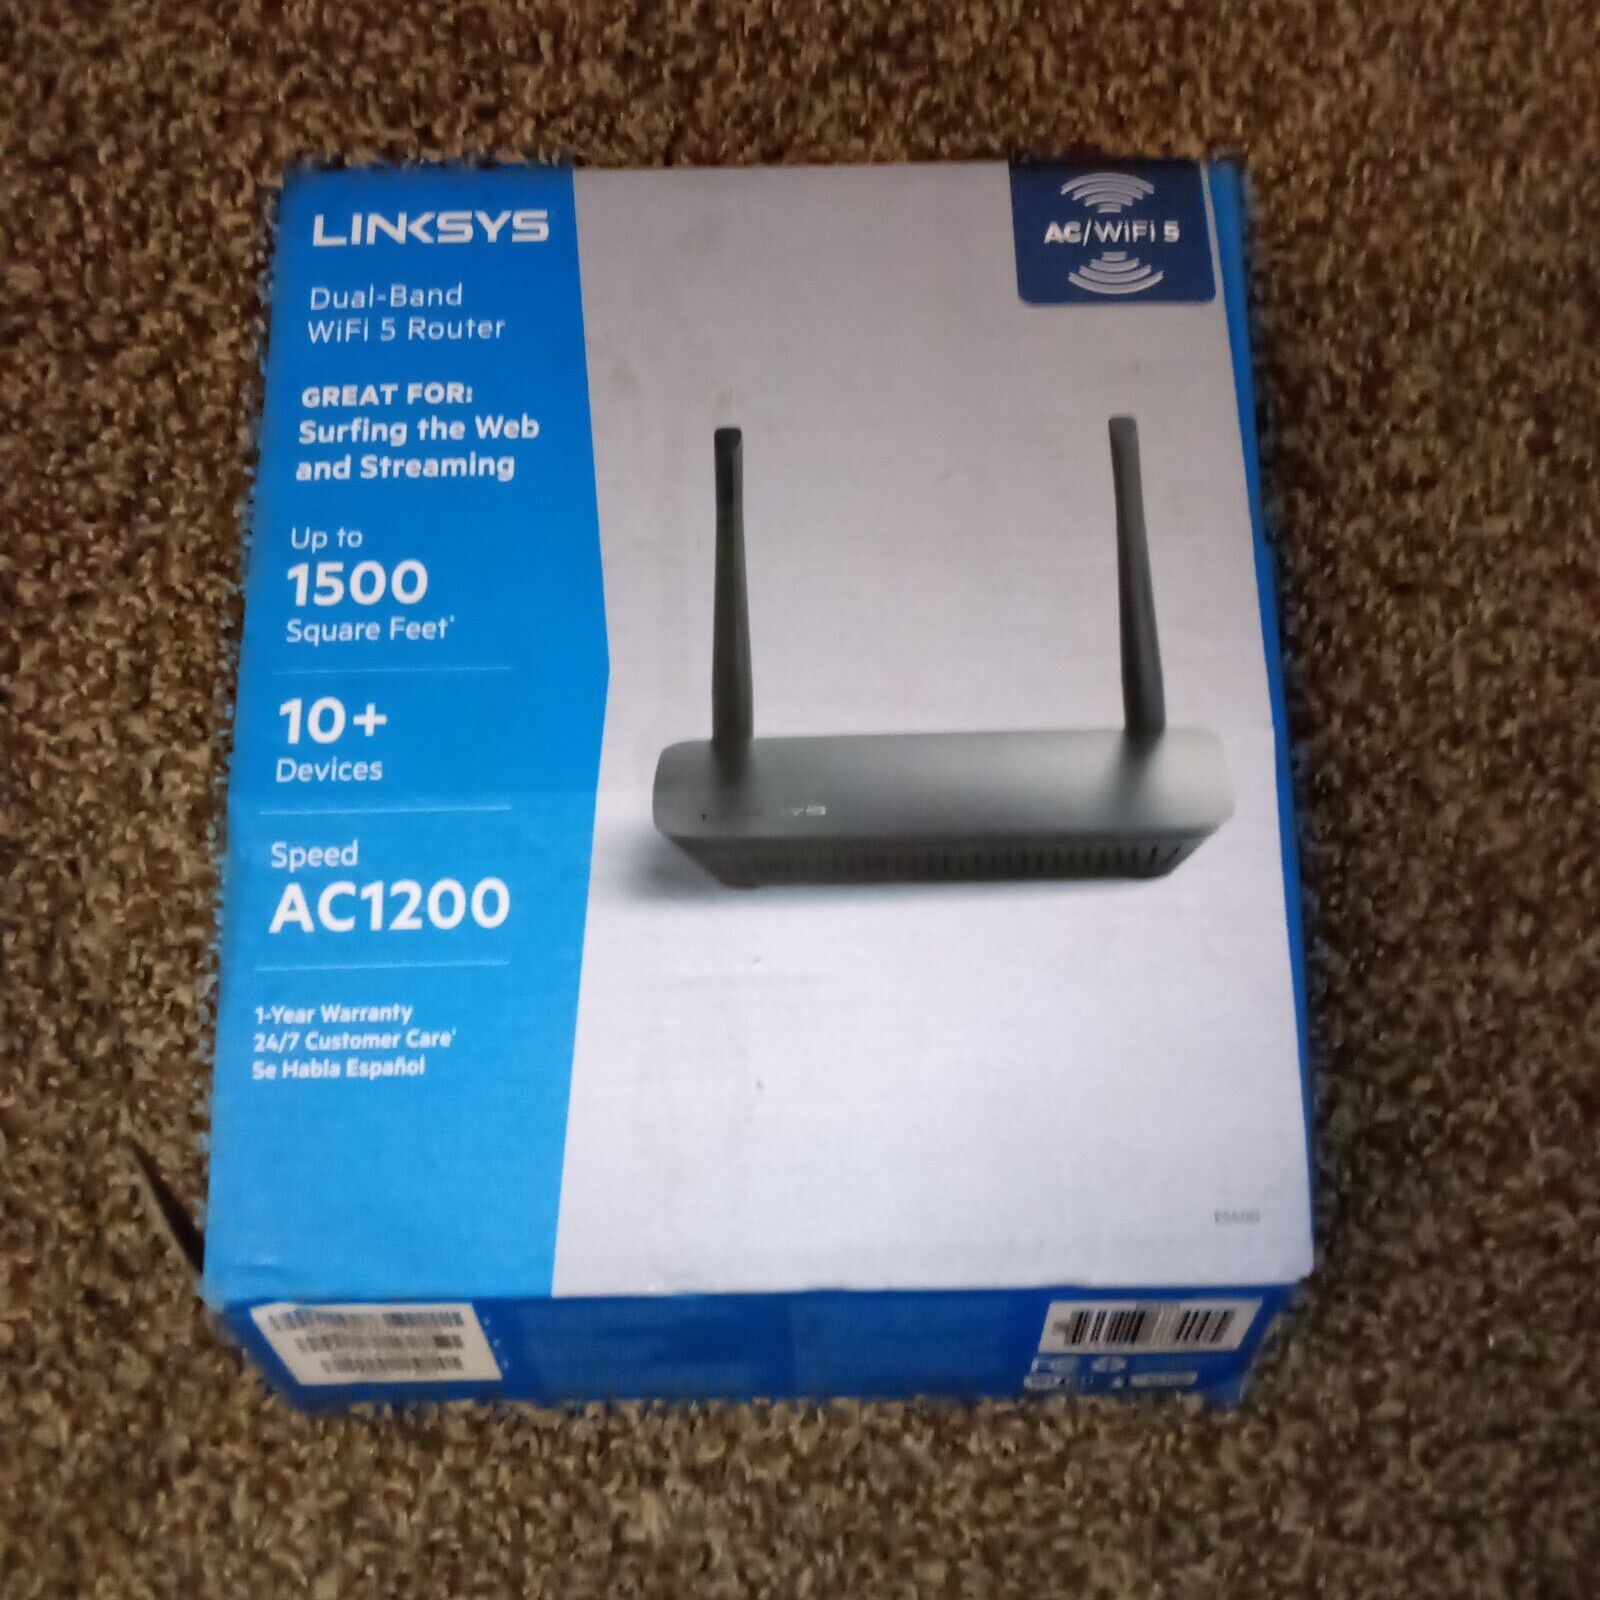 Linksys AC1200 Dual Band Wi-Fi 5 Router 1.2 Gbps 10+ Devices